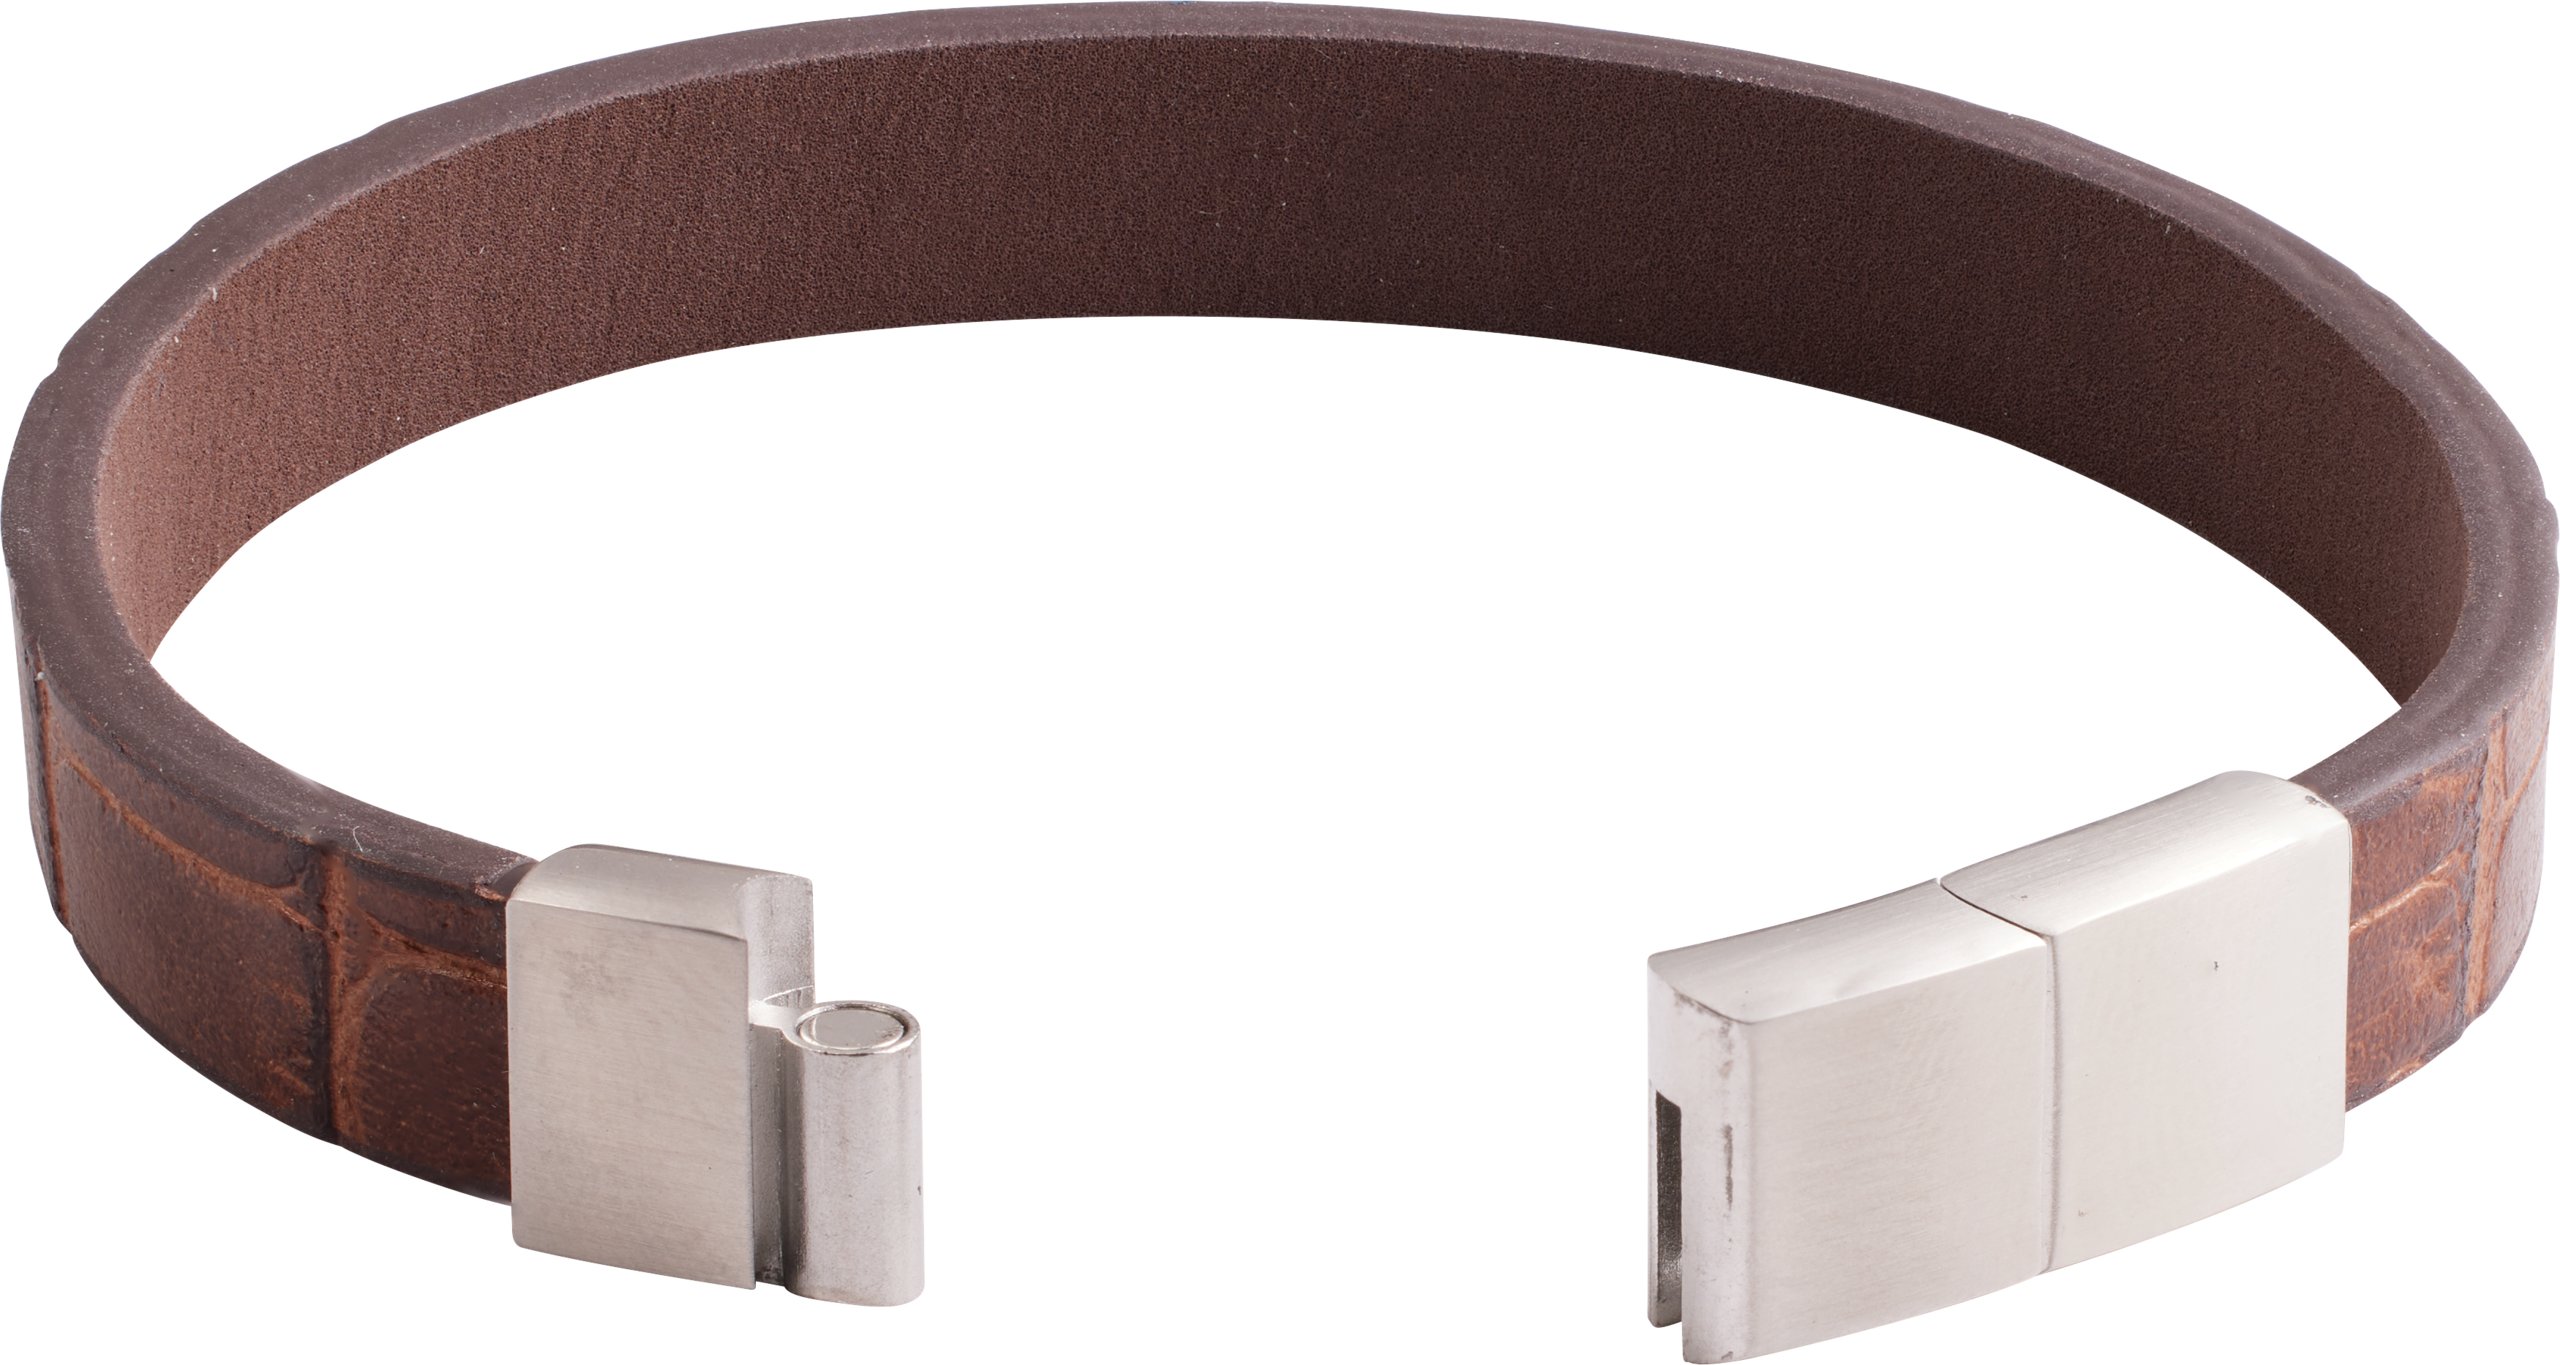 Stainless Steel 11 mm Brown Leather 8 Bracelet